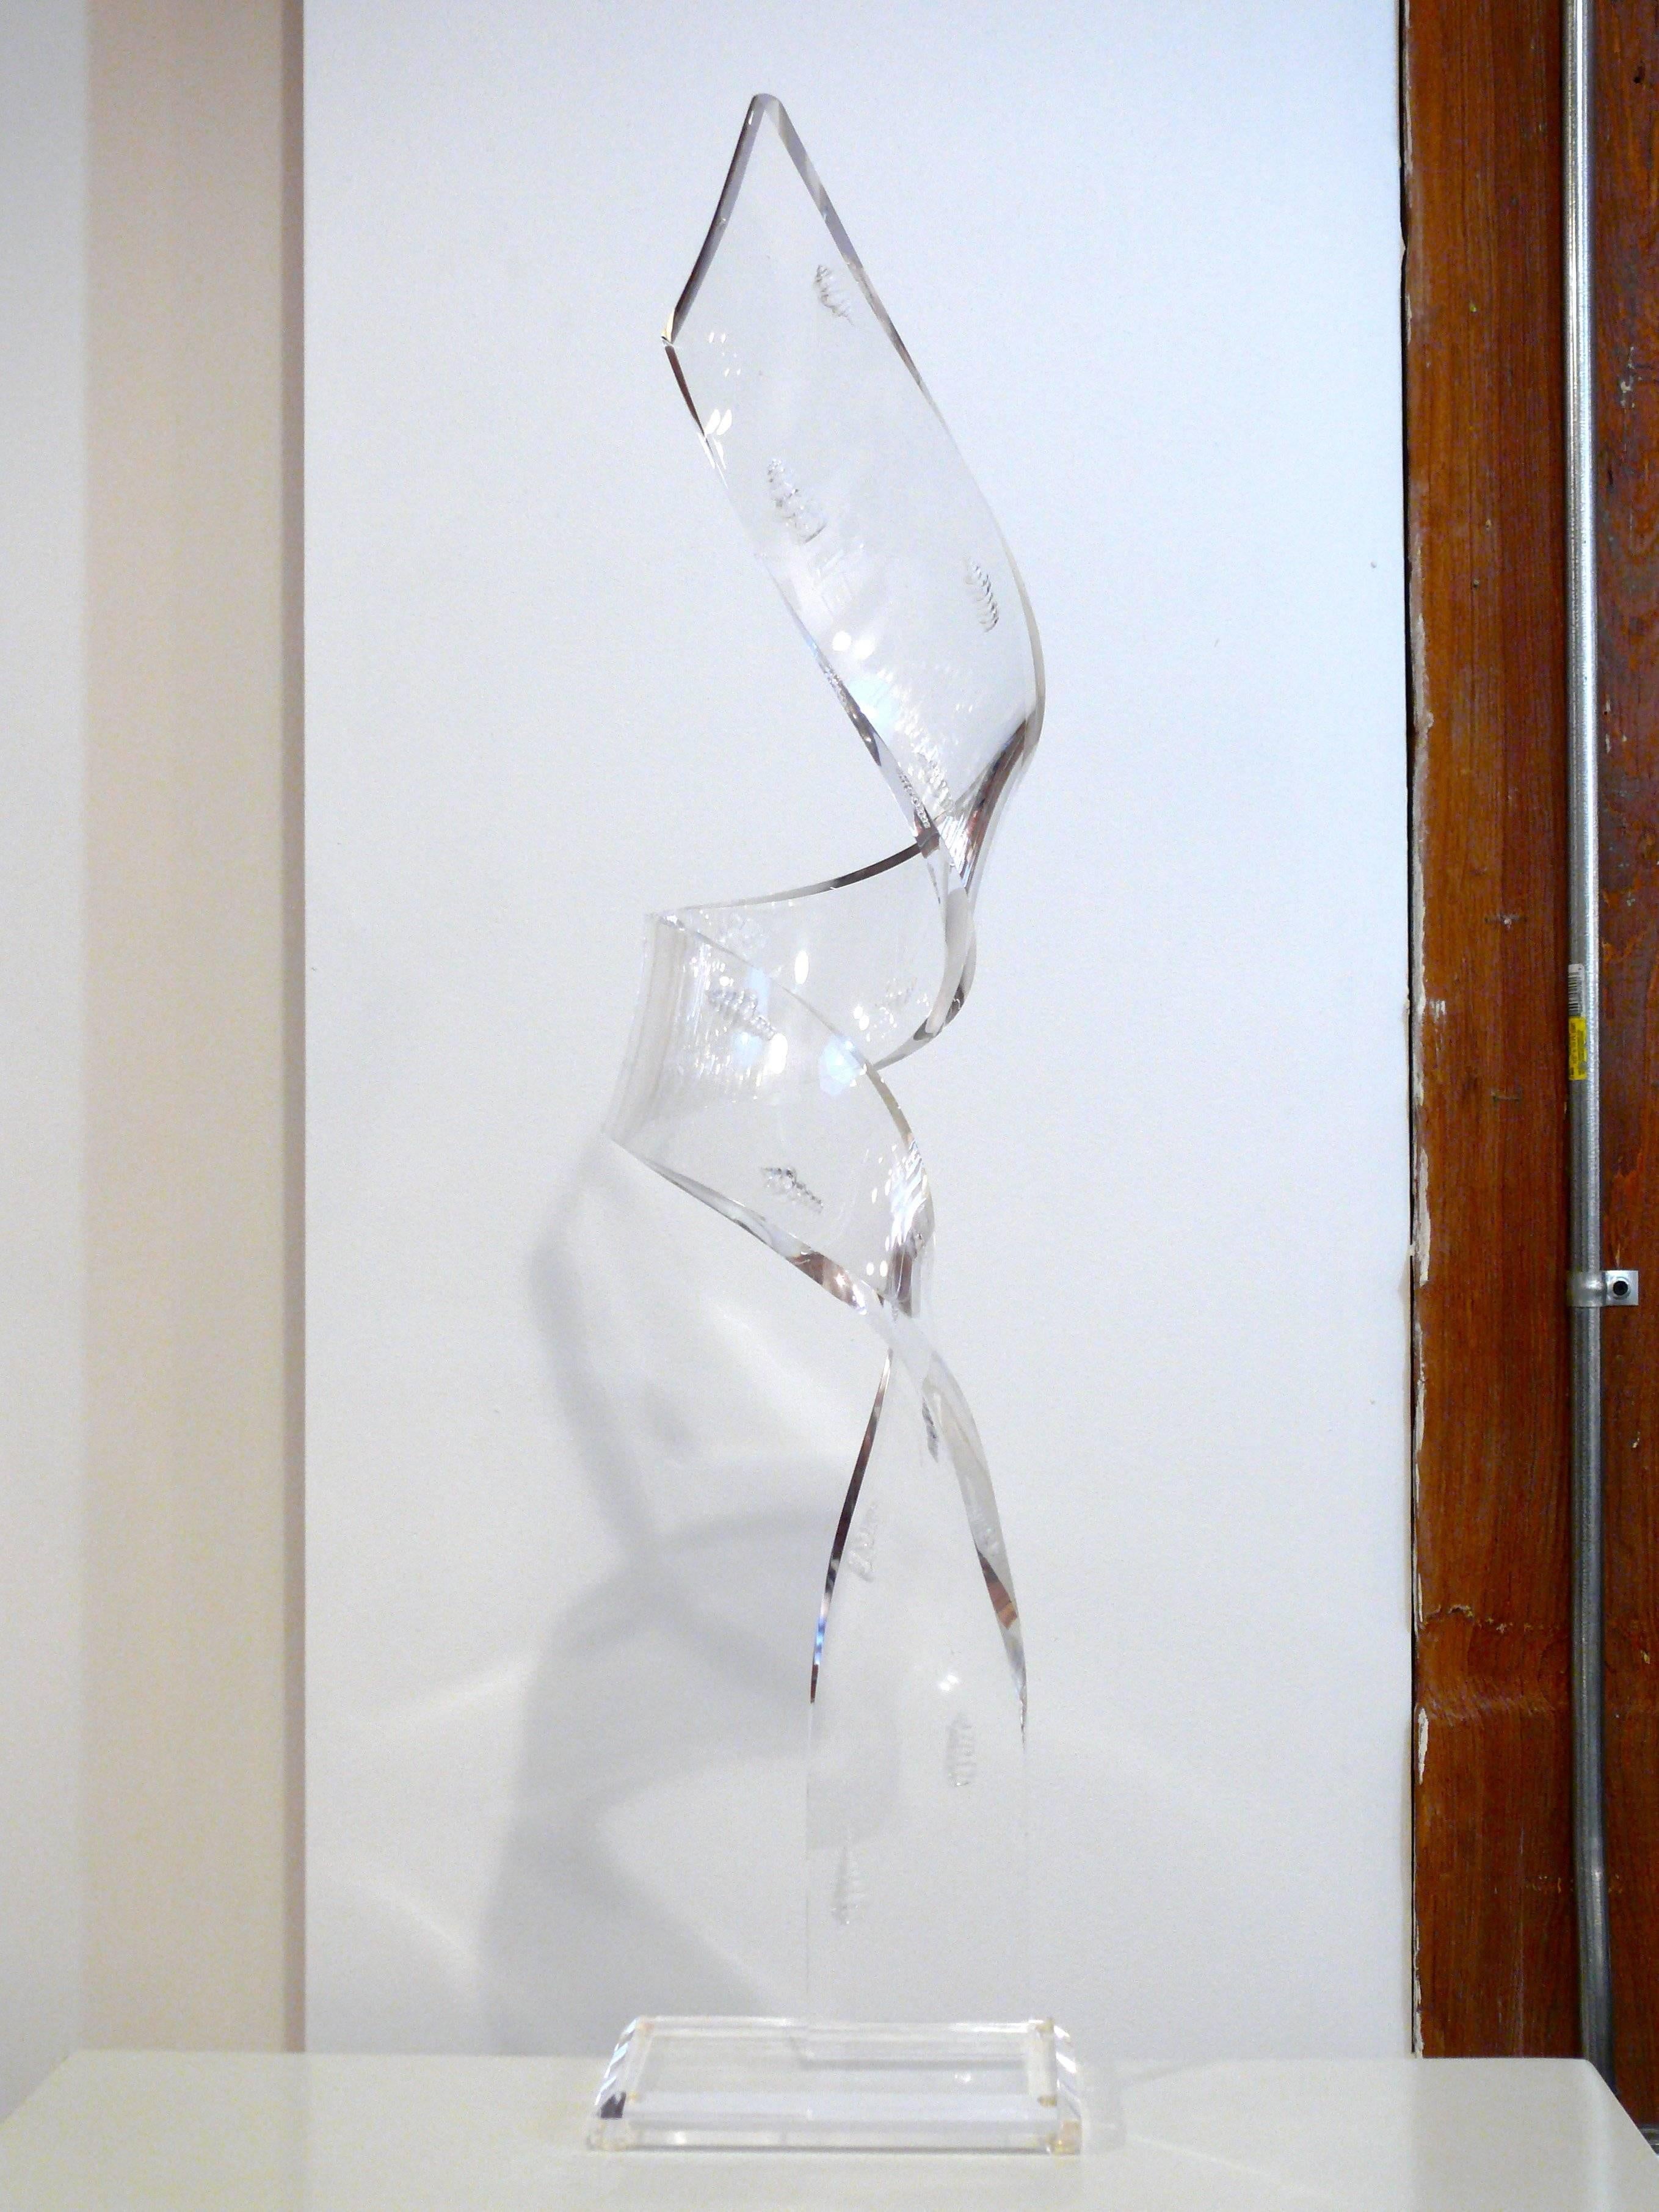 Tall Lucite sculpture with shells carved into the Lucite, measure: 29.75